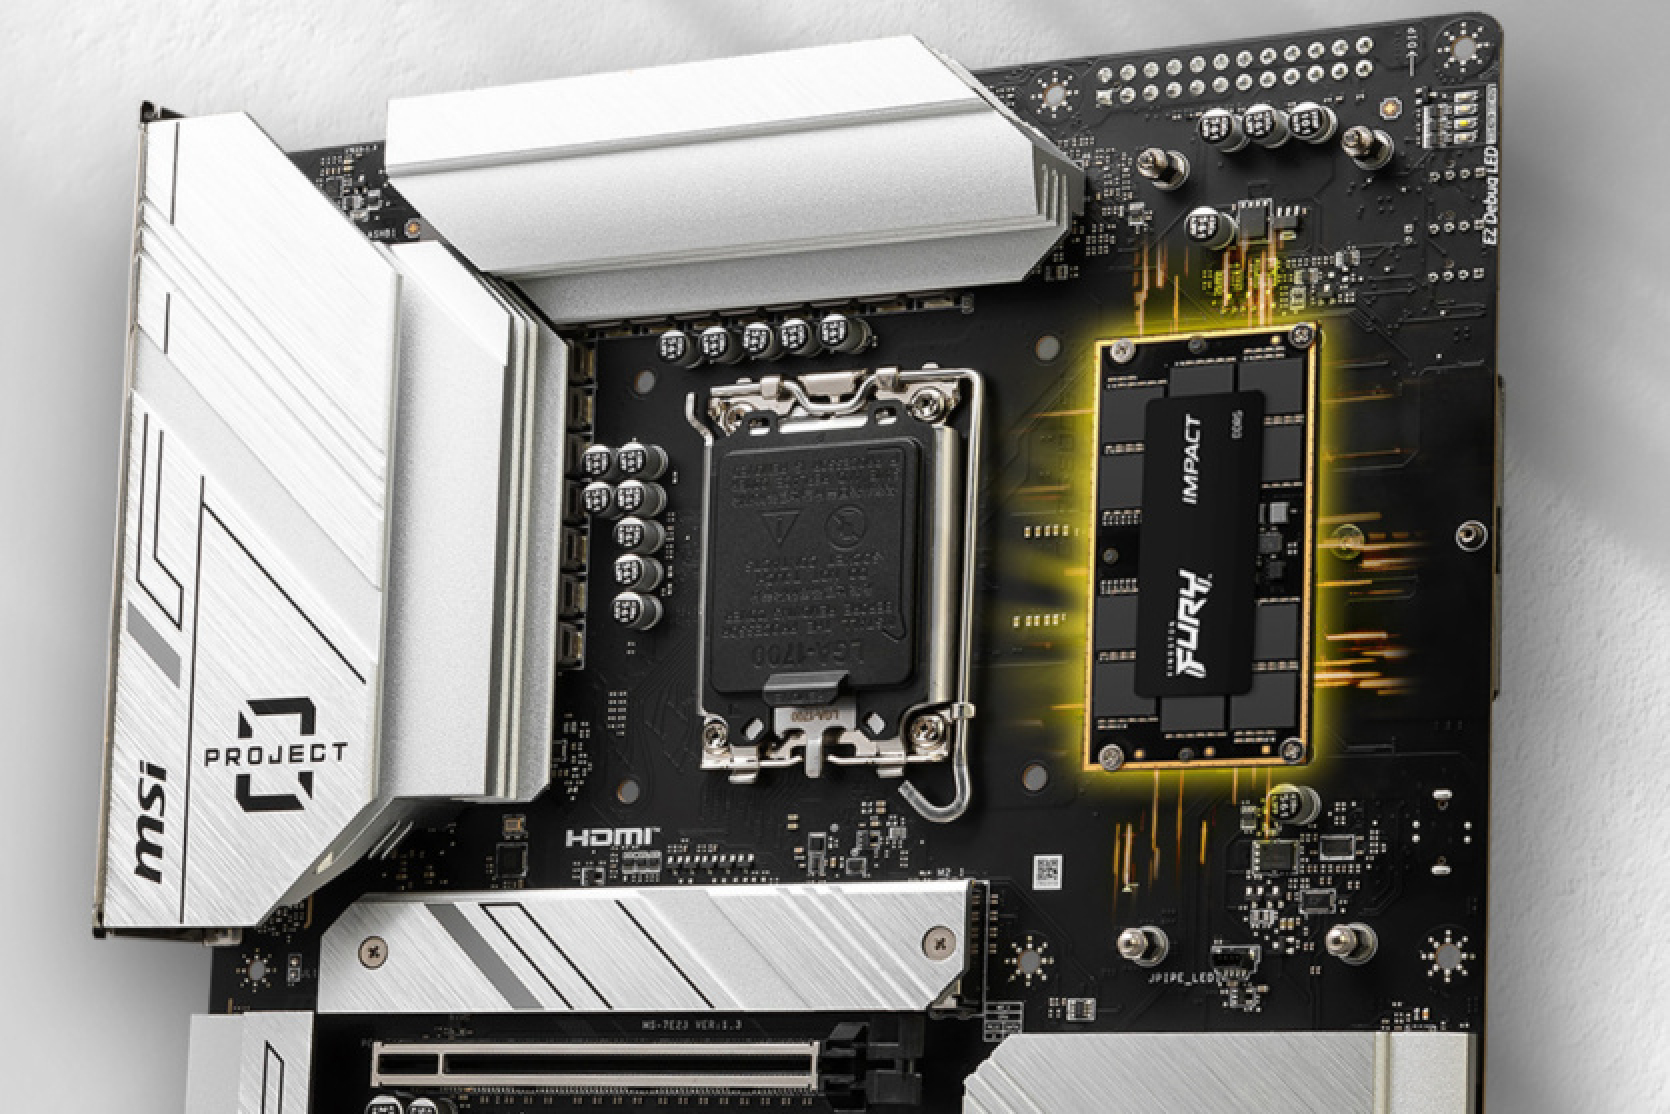 MSI announced the world's first CAMM2 memory motherboard for desktop PCs